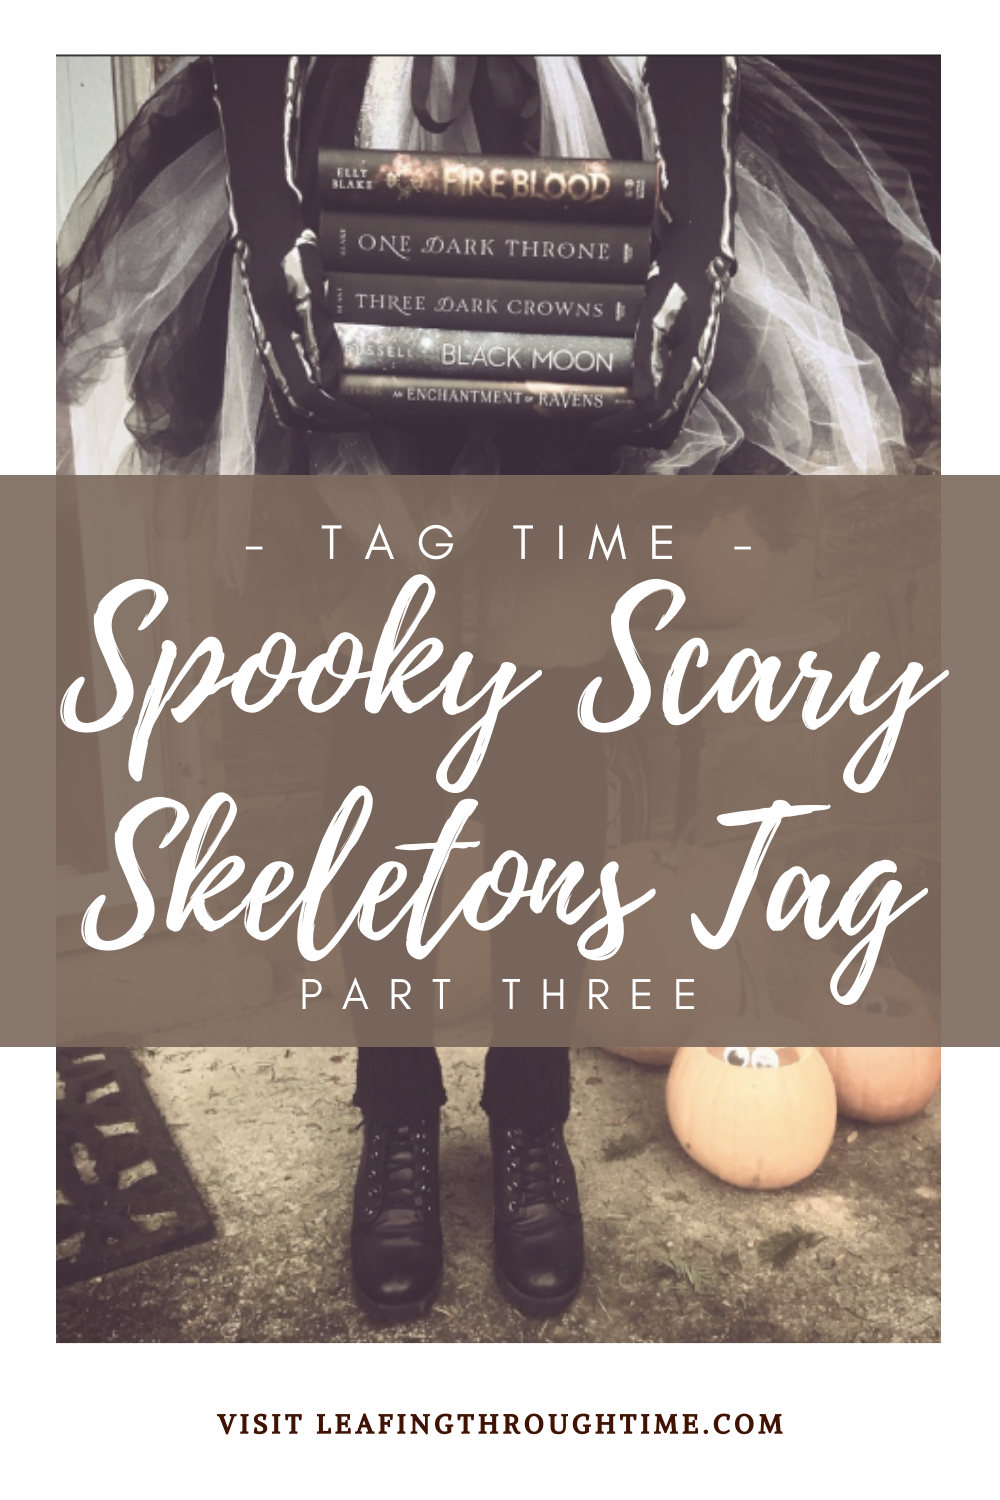 Spooky Scary Skeletons Tag – Part 3